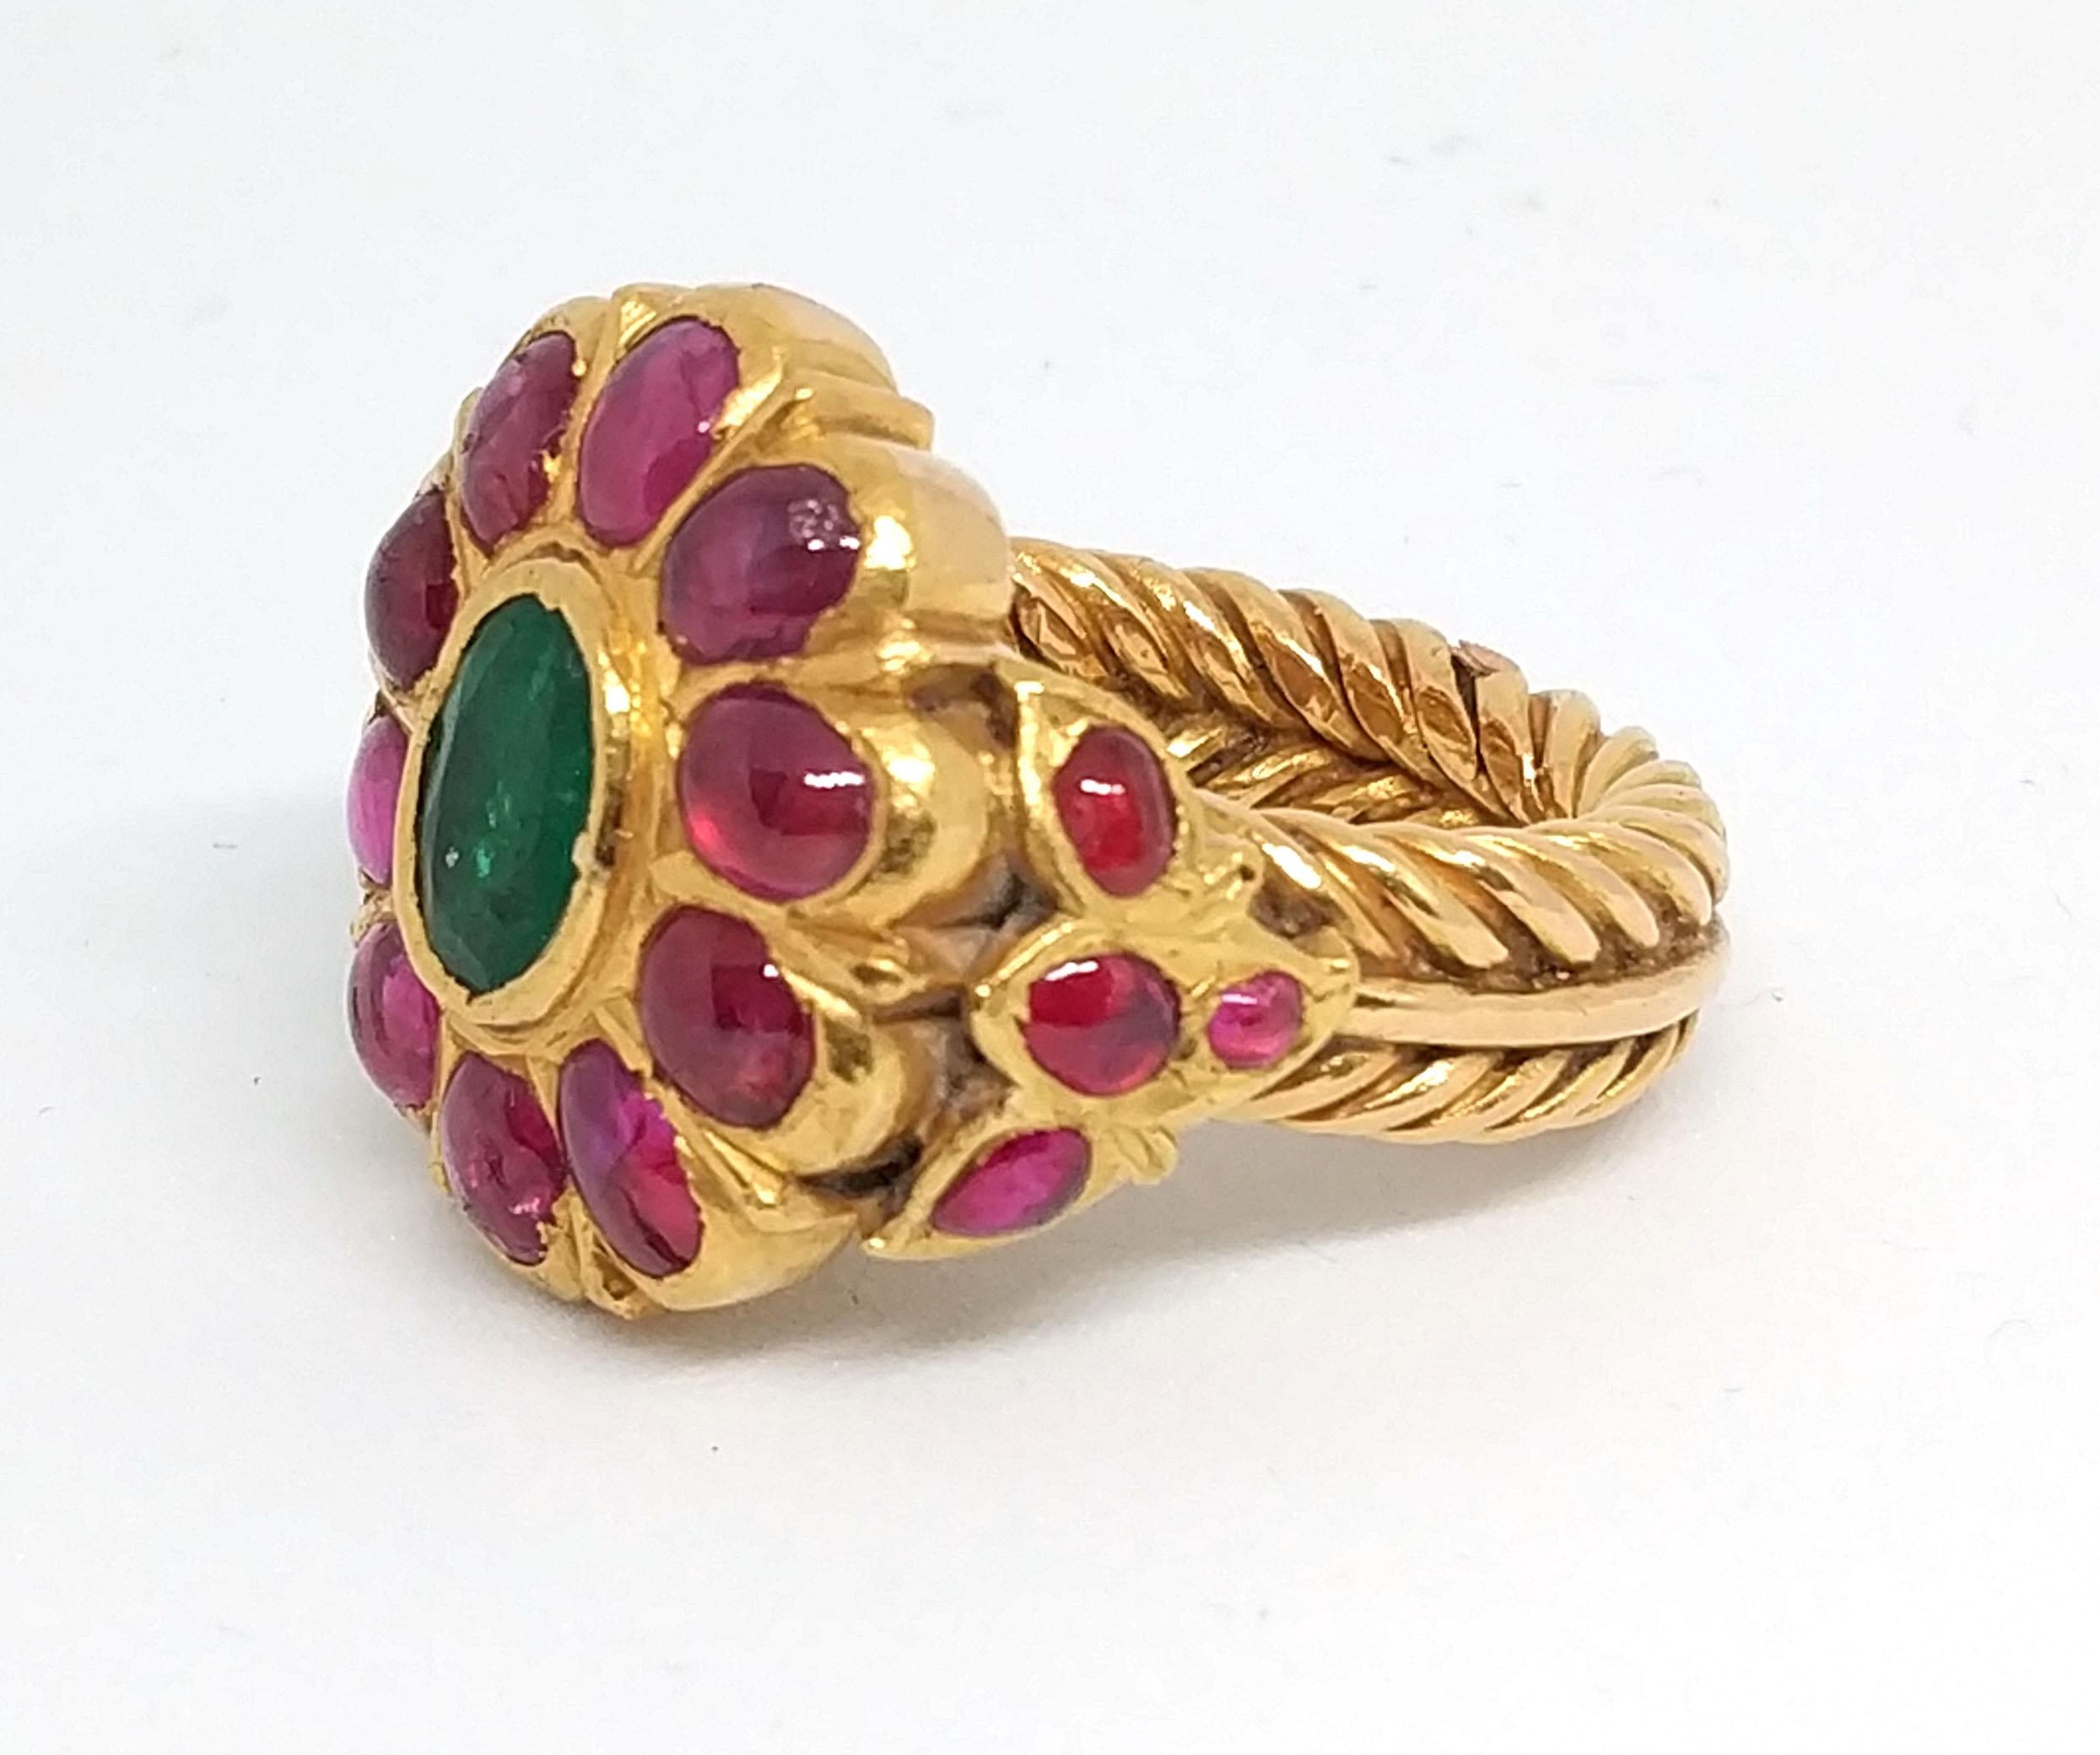 Anglo-Indian Antique Royal 5.5 carat Ruby and 3 carat Emerald Ring in 23 Carat Gold For Sale